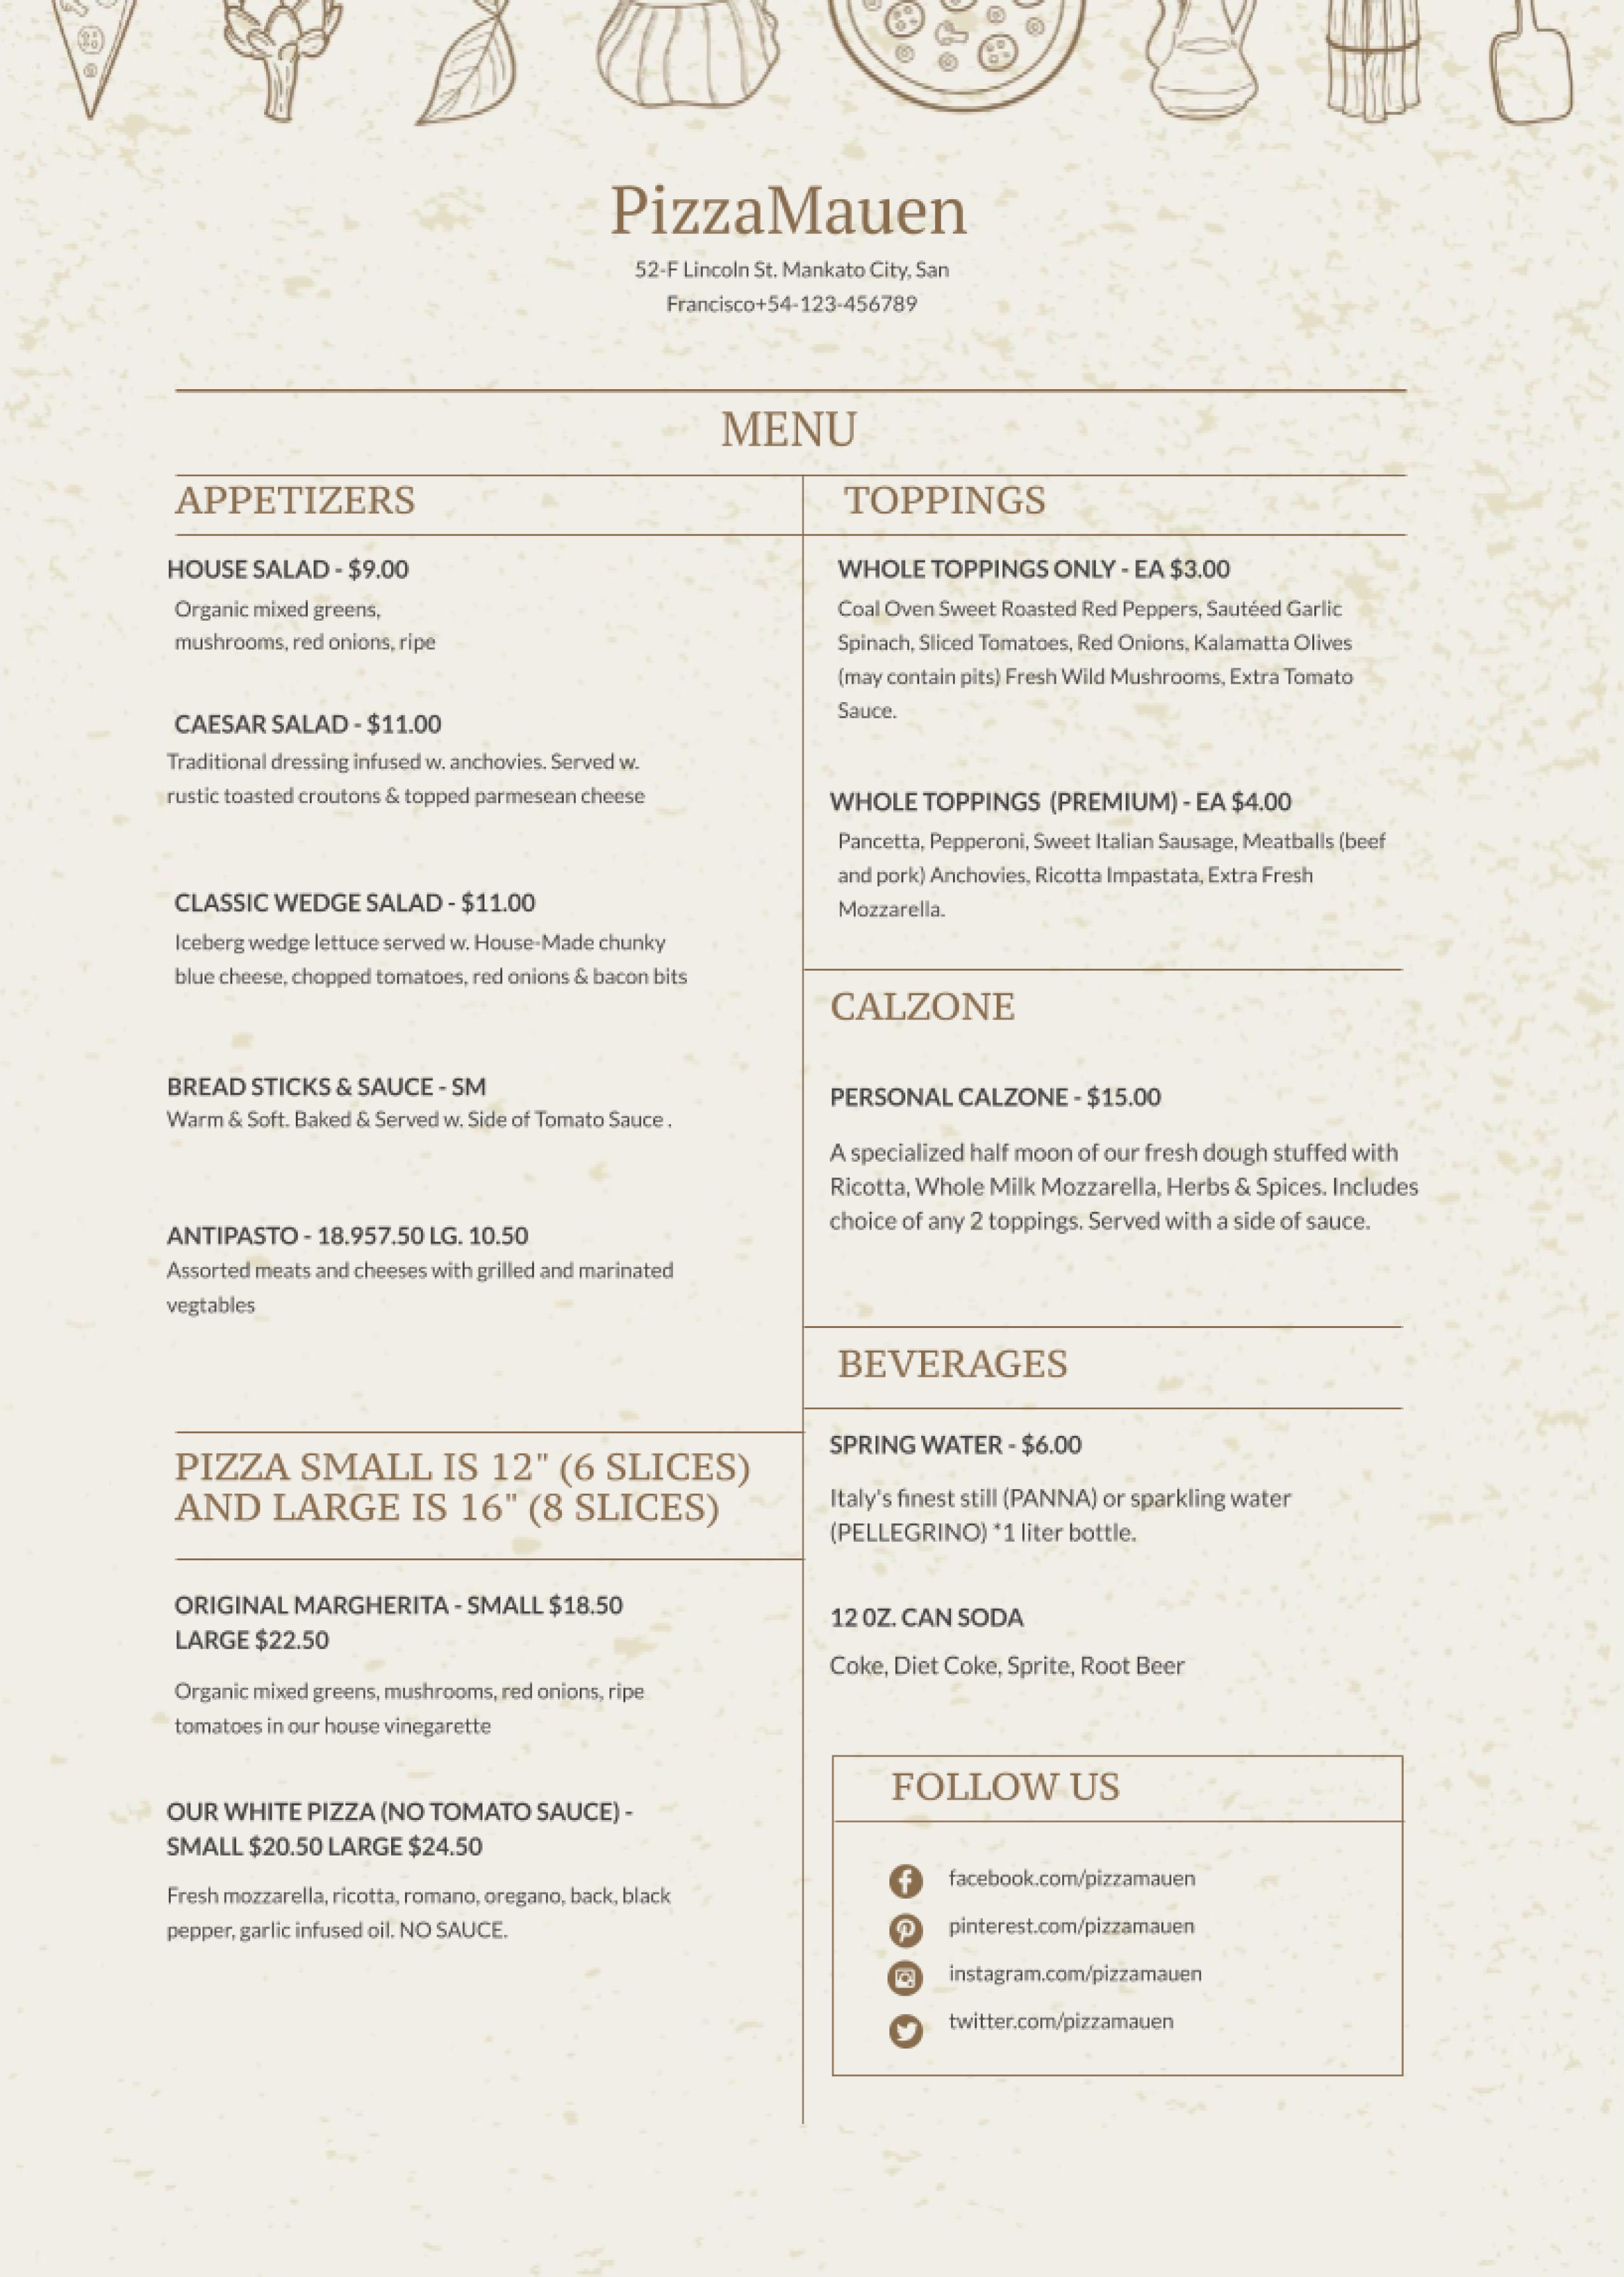 22 Free Simple Menu Templates For Restaurants, Cafes, And Parties With Regard To Free Restaurant Menu Templates For Microsoft Word